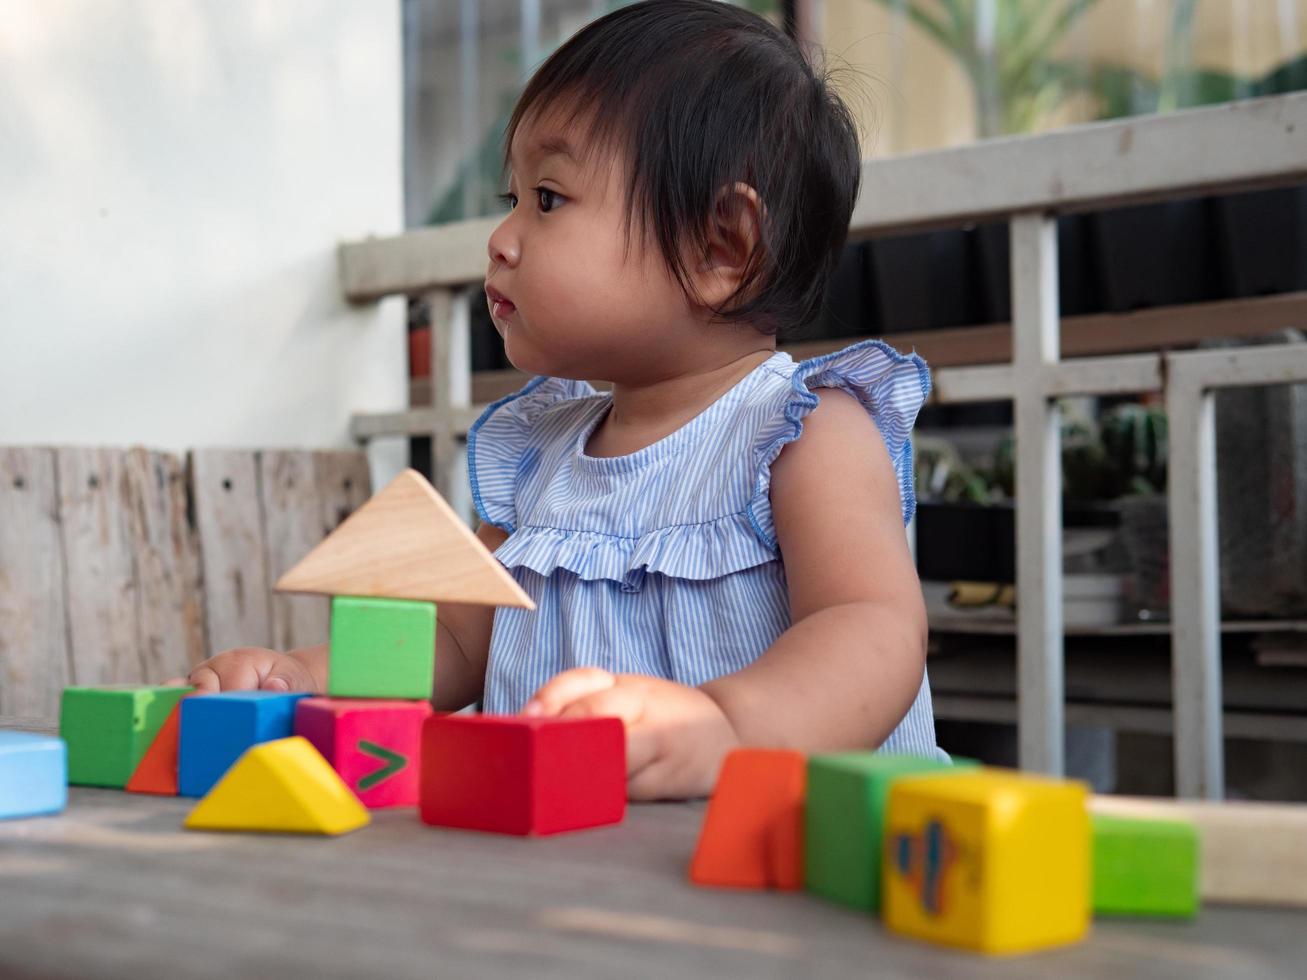 Little asian girl playing with wood blocks on the floor photo